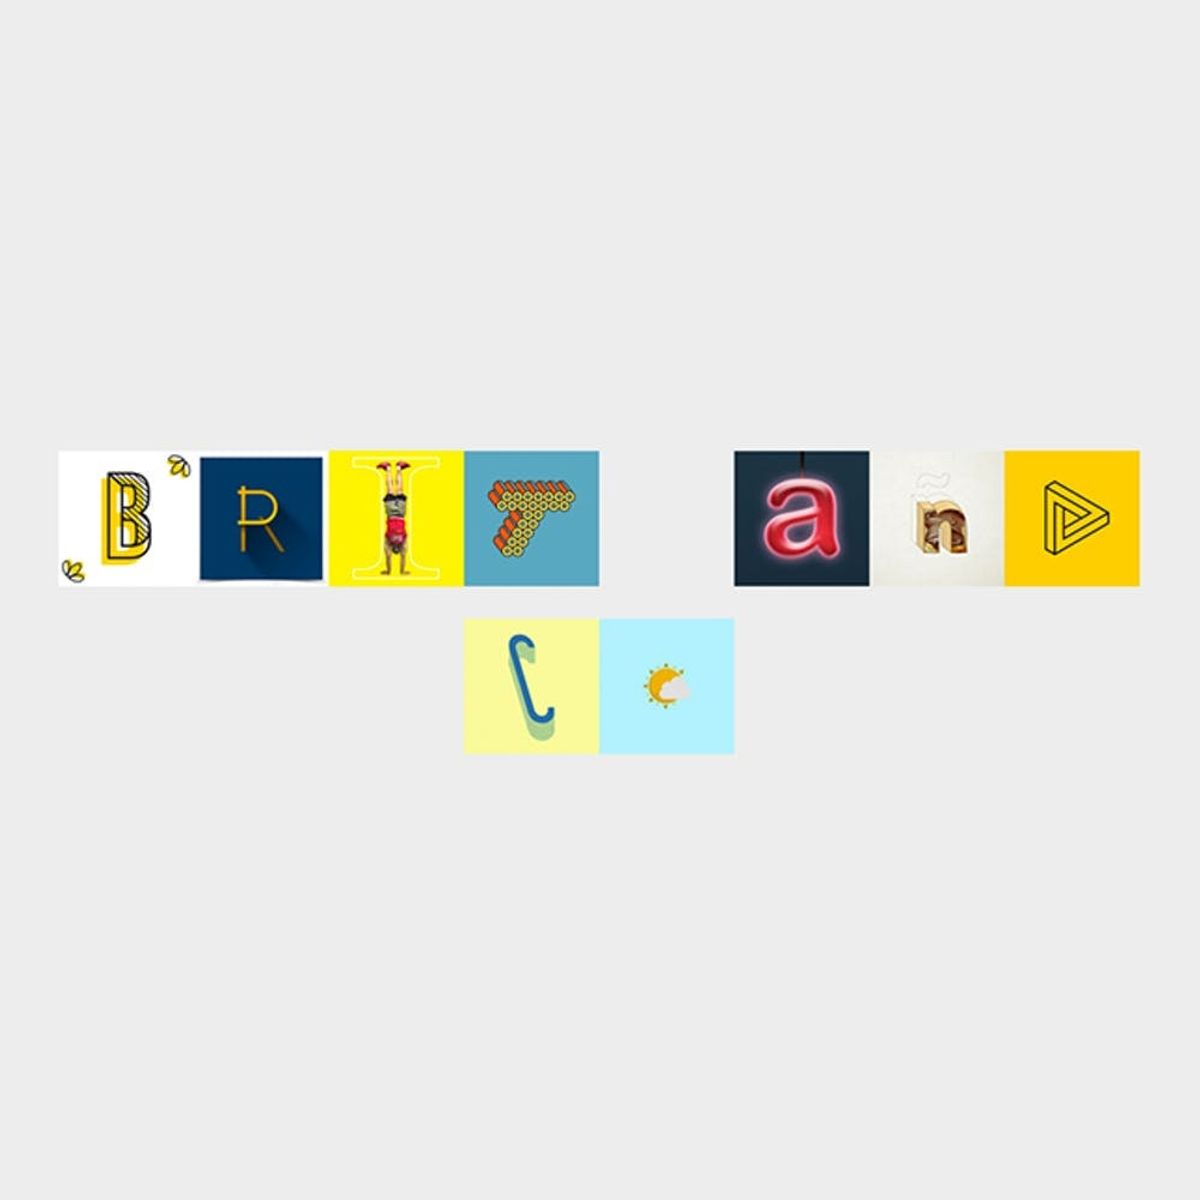 This Website Will Turn Your Instagrams into Typography Masterpieces